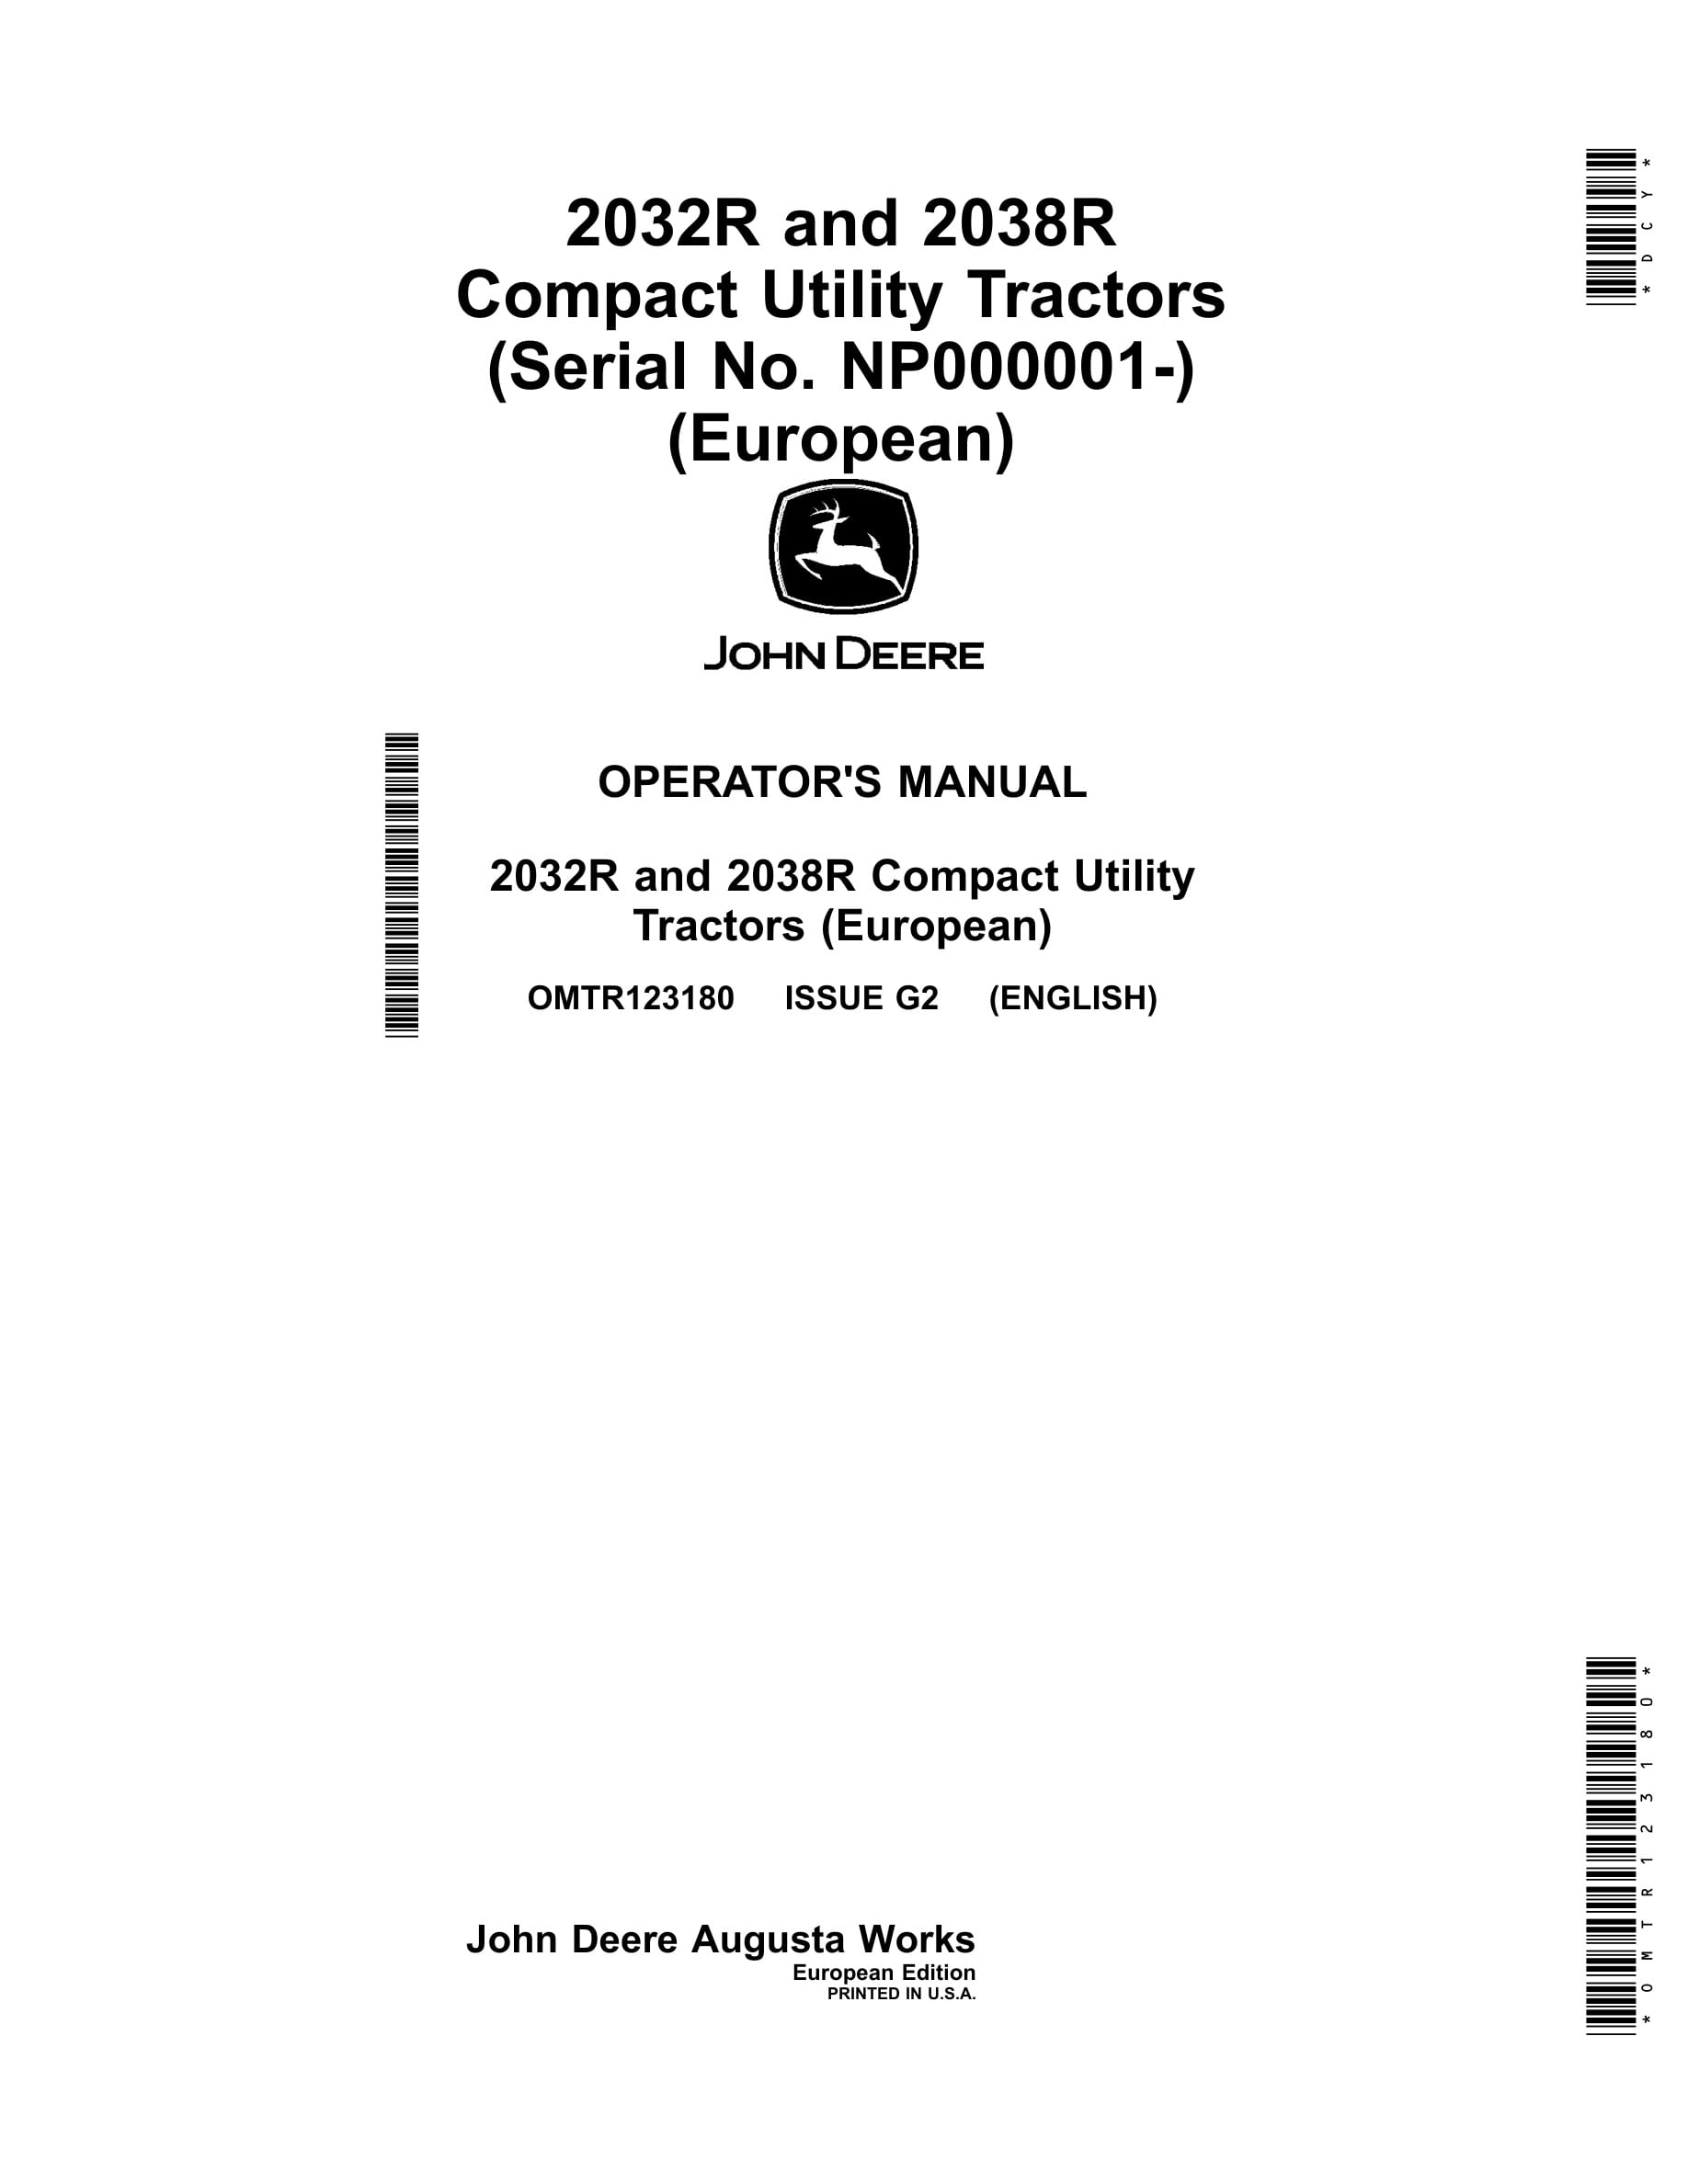 John Deere 2032r And 2038r Compact Utility Tractors Operator Manuals OMTR123180-1